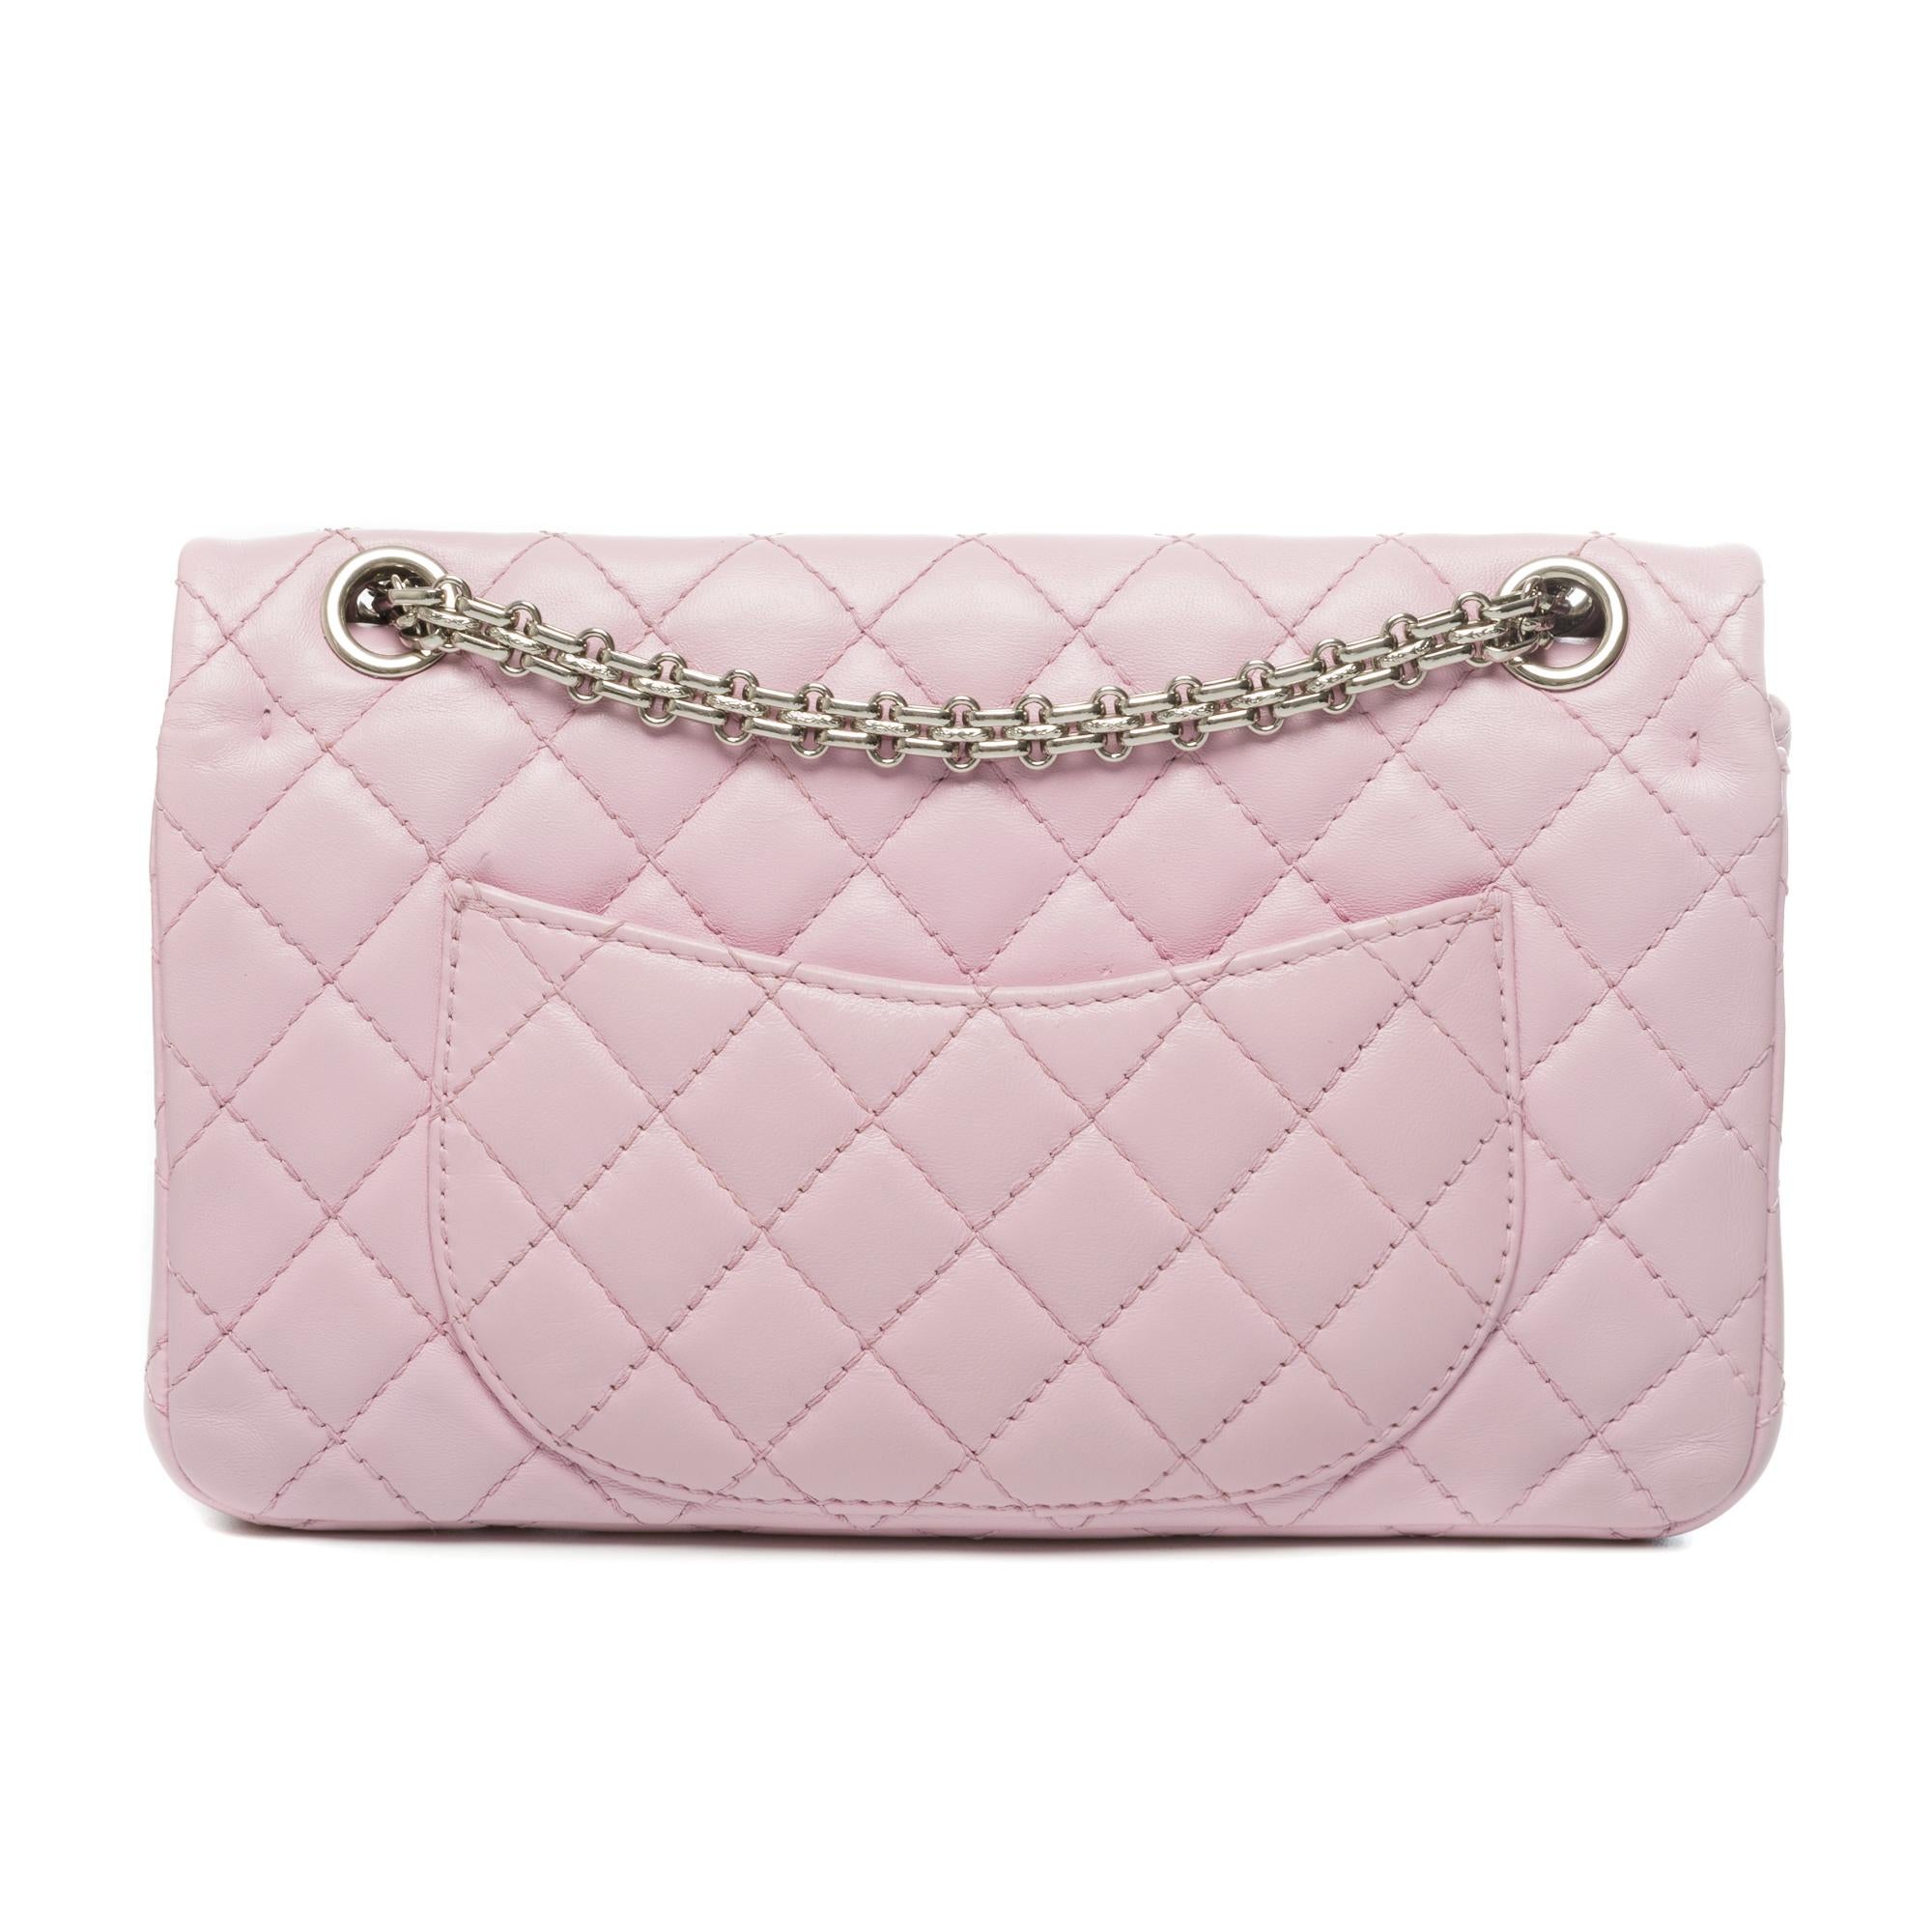 Beautiful Chanel 2.55 double flap shoulder bag in light pink quilted leather, silver metal hardware, a Mademoiselle silver metal chain handle allowing a shoulder or shoulder strap

2.55 silver metal closure on flap
A patch pocket on the back of the